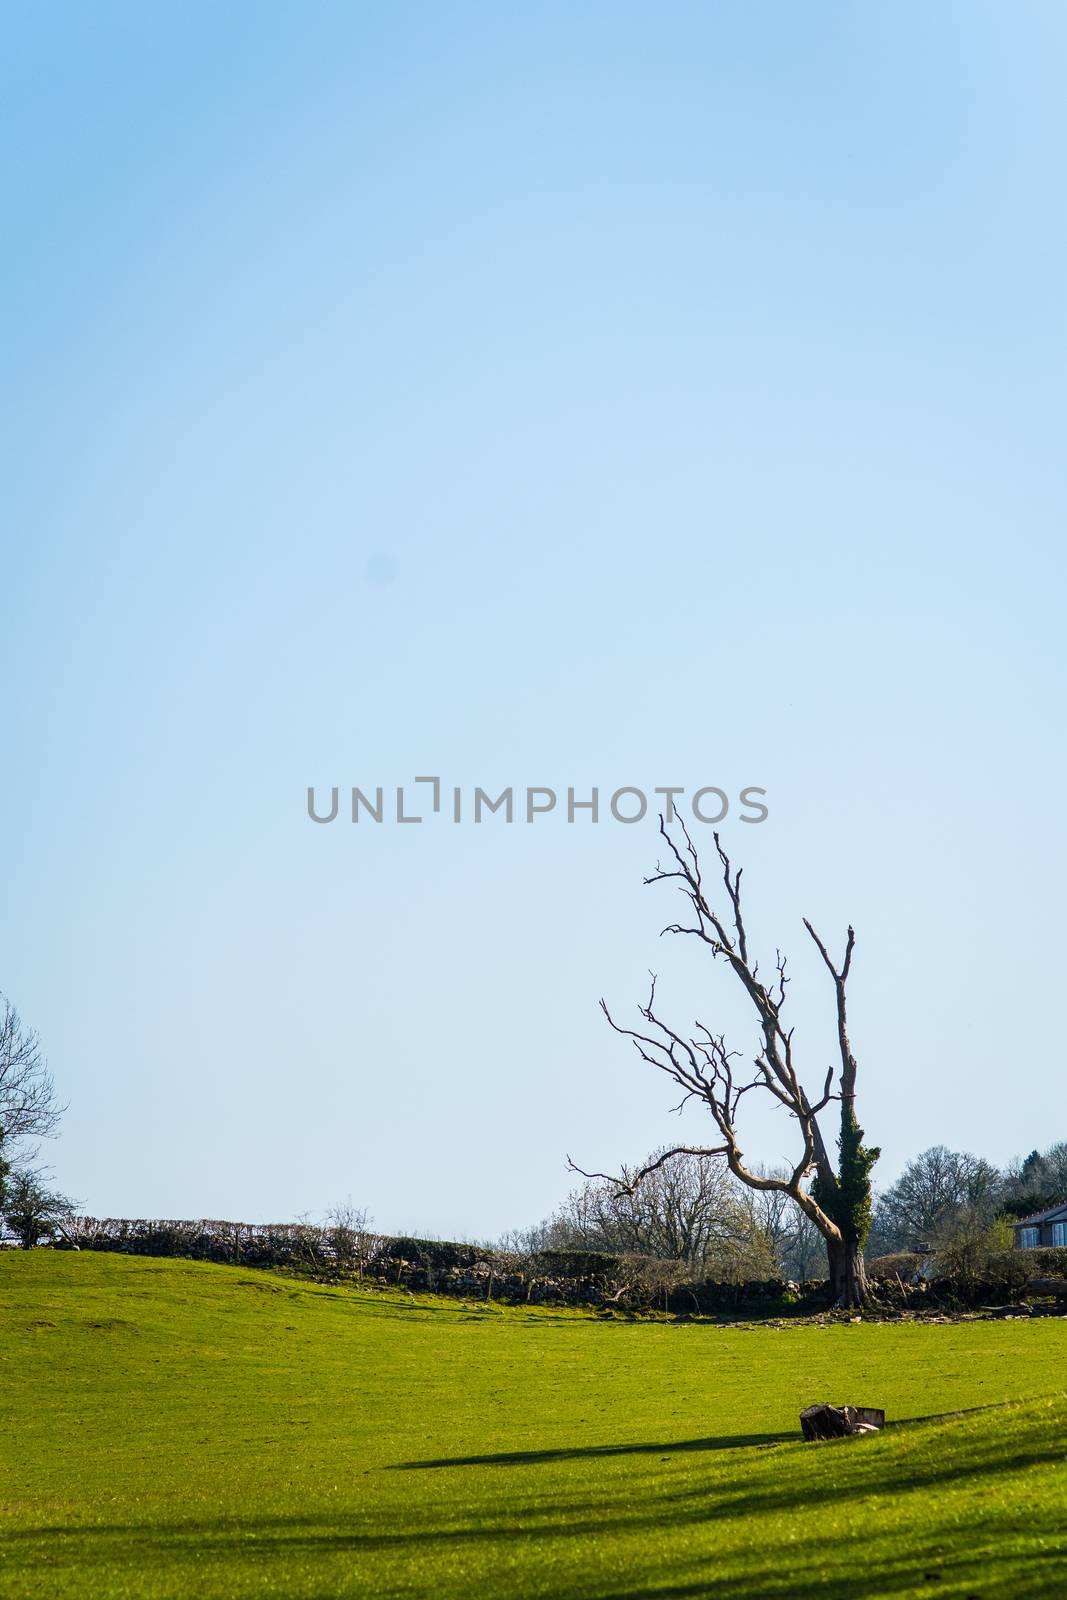 Old lonely dry tree without leaves in a field UK by paddythegolfer